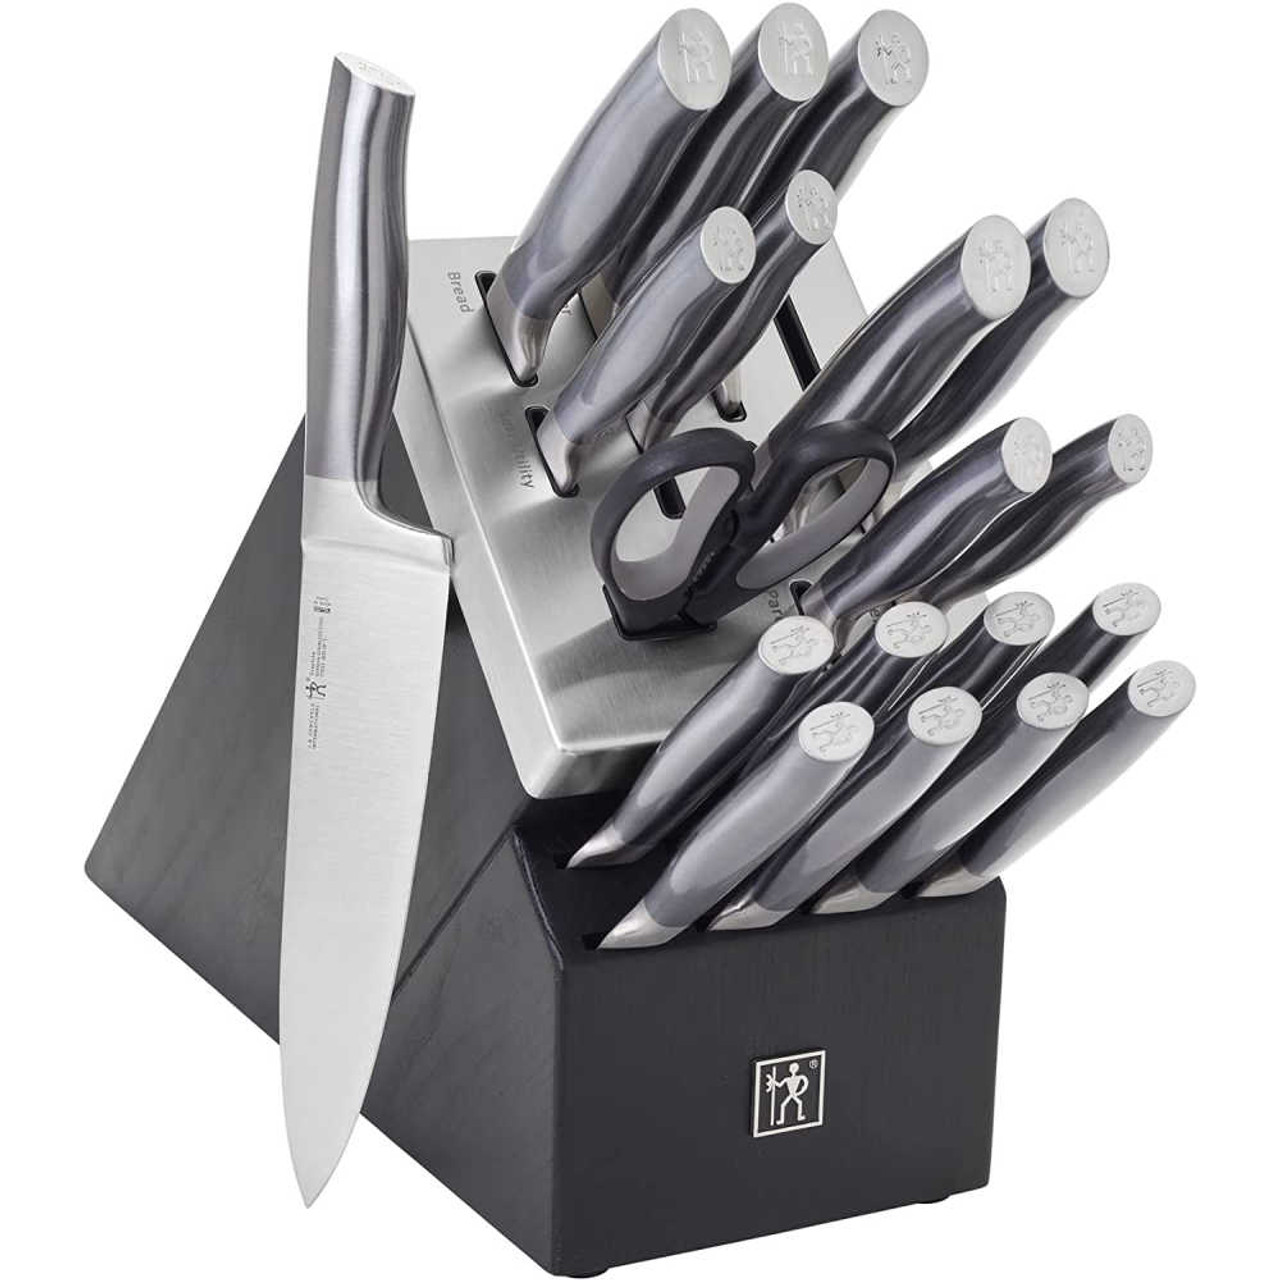 https://cdn11.bigcommerce.com/s-hccytny0od/images/stencil/1280x1280/products/5184/22376/Henckels_Graphite_20-Piece_Self-Sharpening_Knife_Block_Set_Black__29931.1669147325.jpg?c=2?imbypass=on